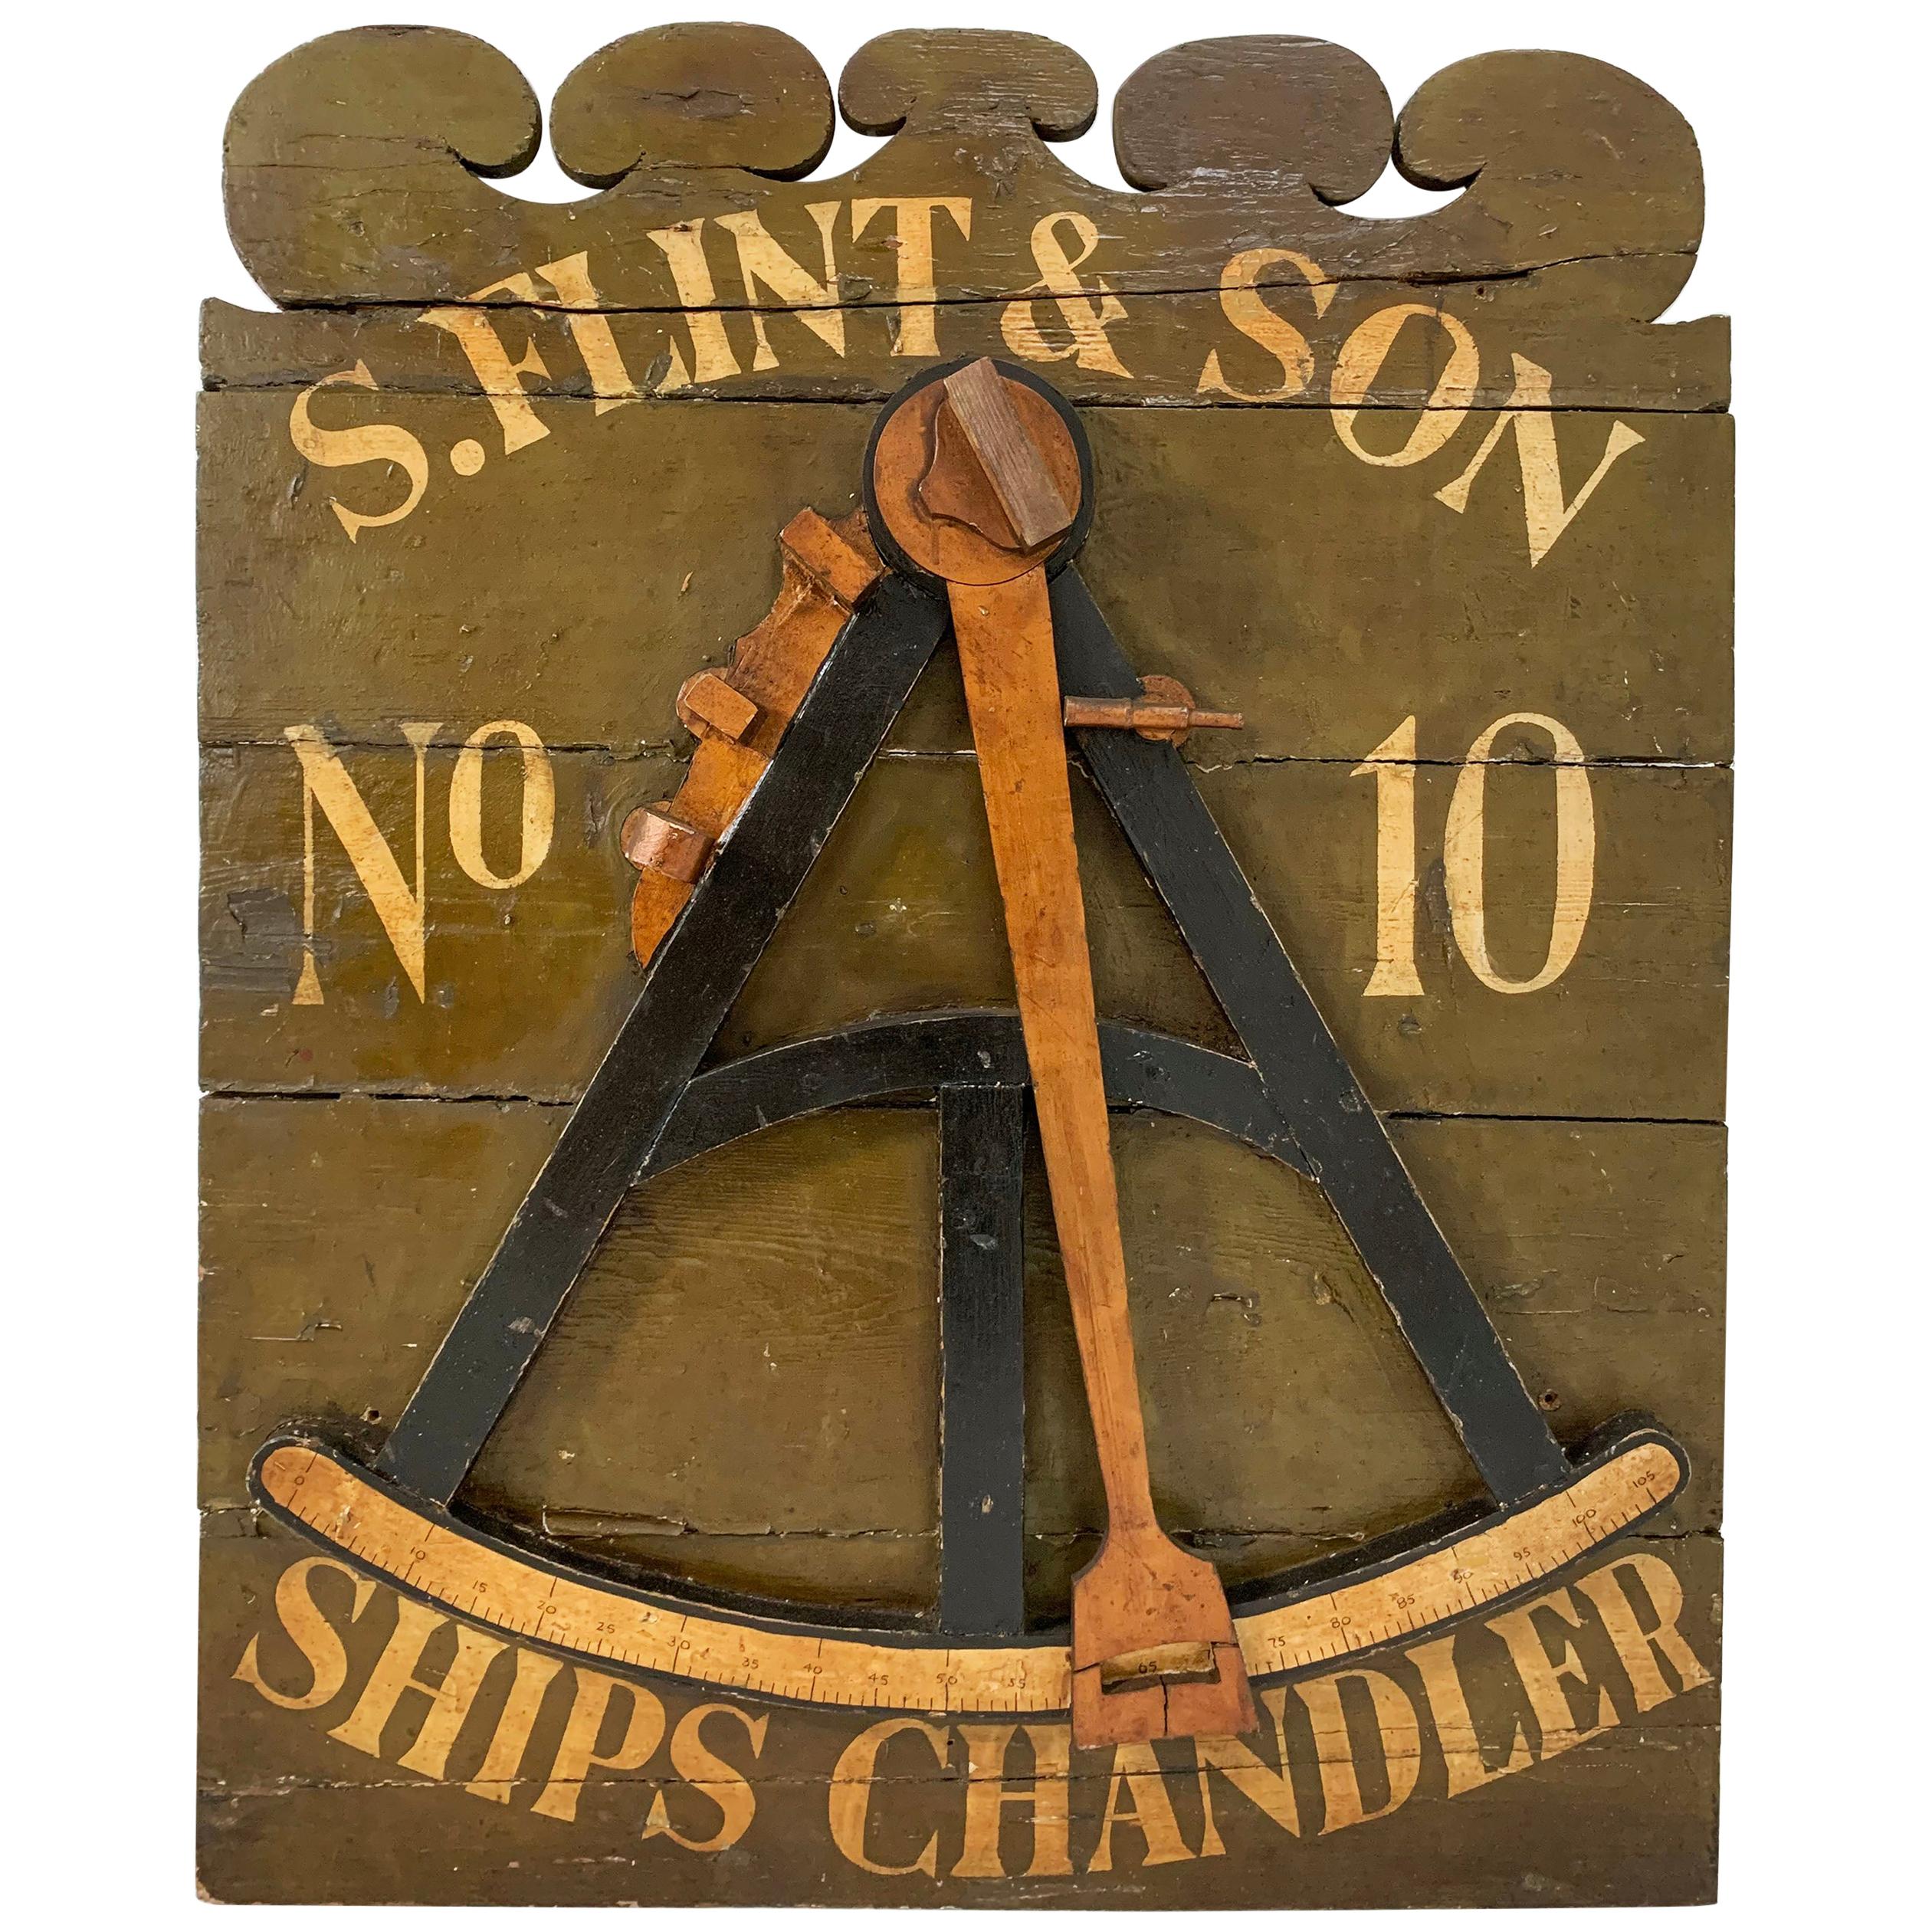 19th Century Antique Ships Chandler Shop Advertising Sign